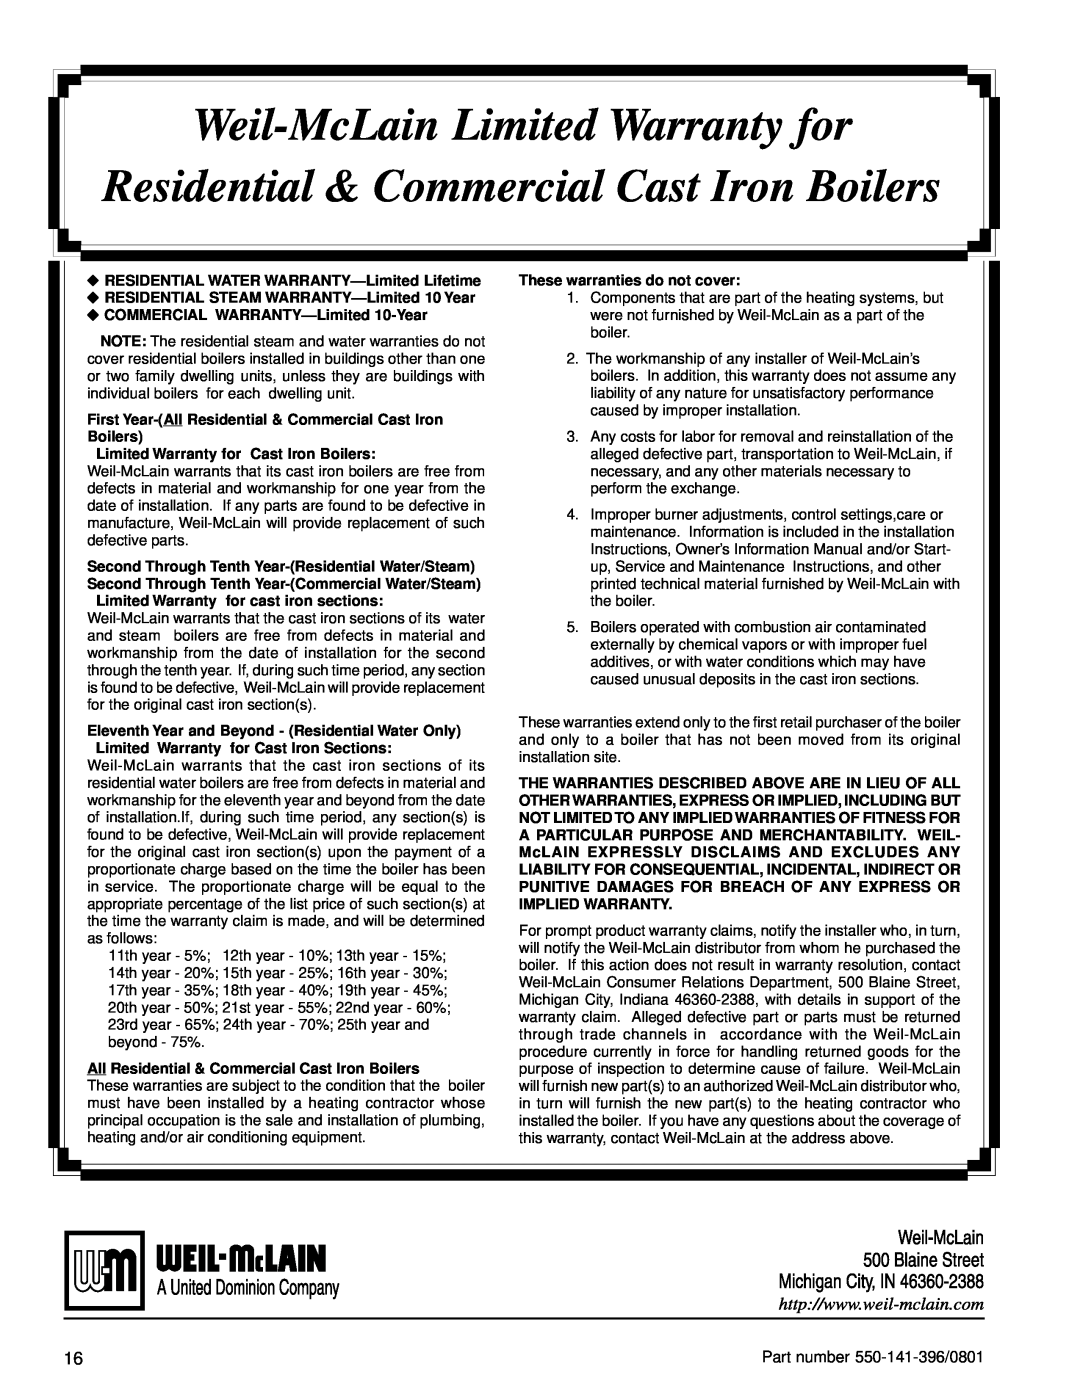 Weil-McLain 550-141-396/0801 Weil-McLainLimited Warranty for, Residential & Commercial Cast Iron Boilers 